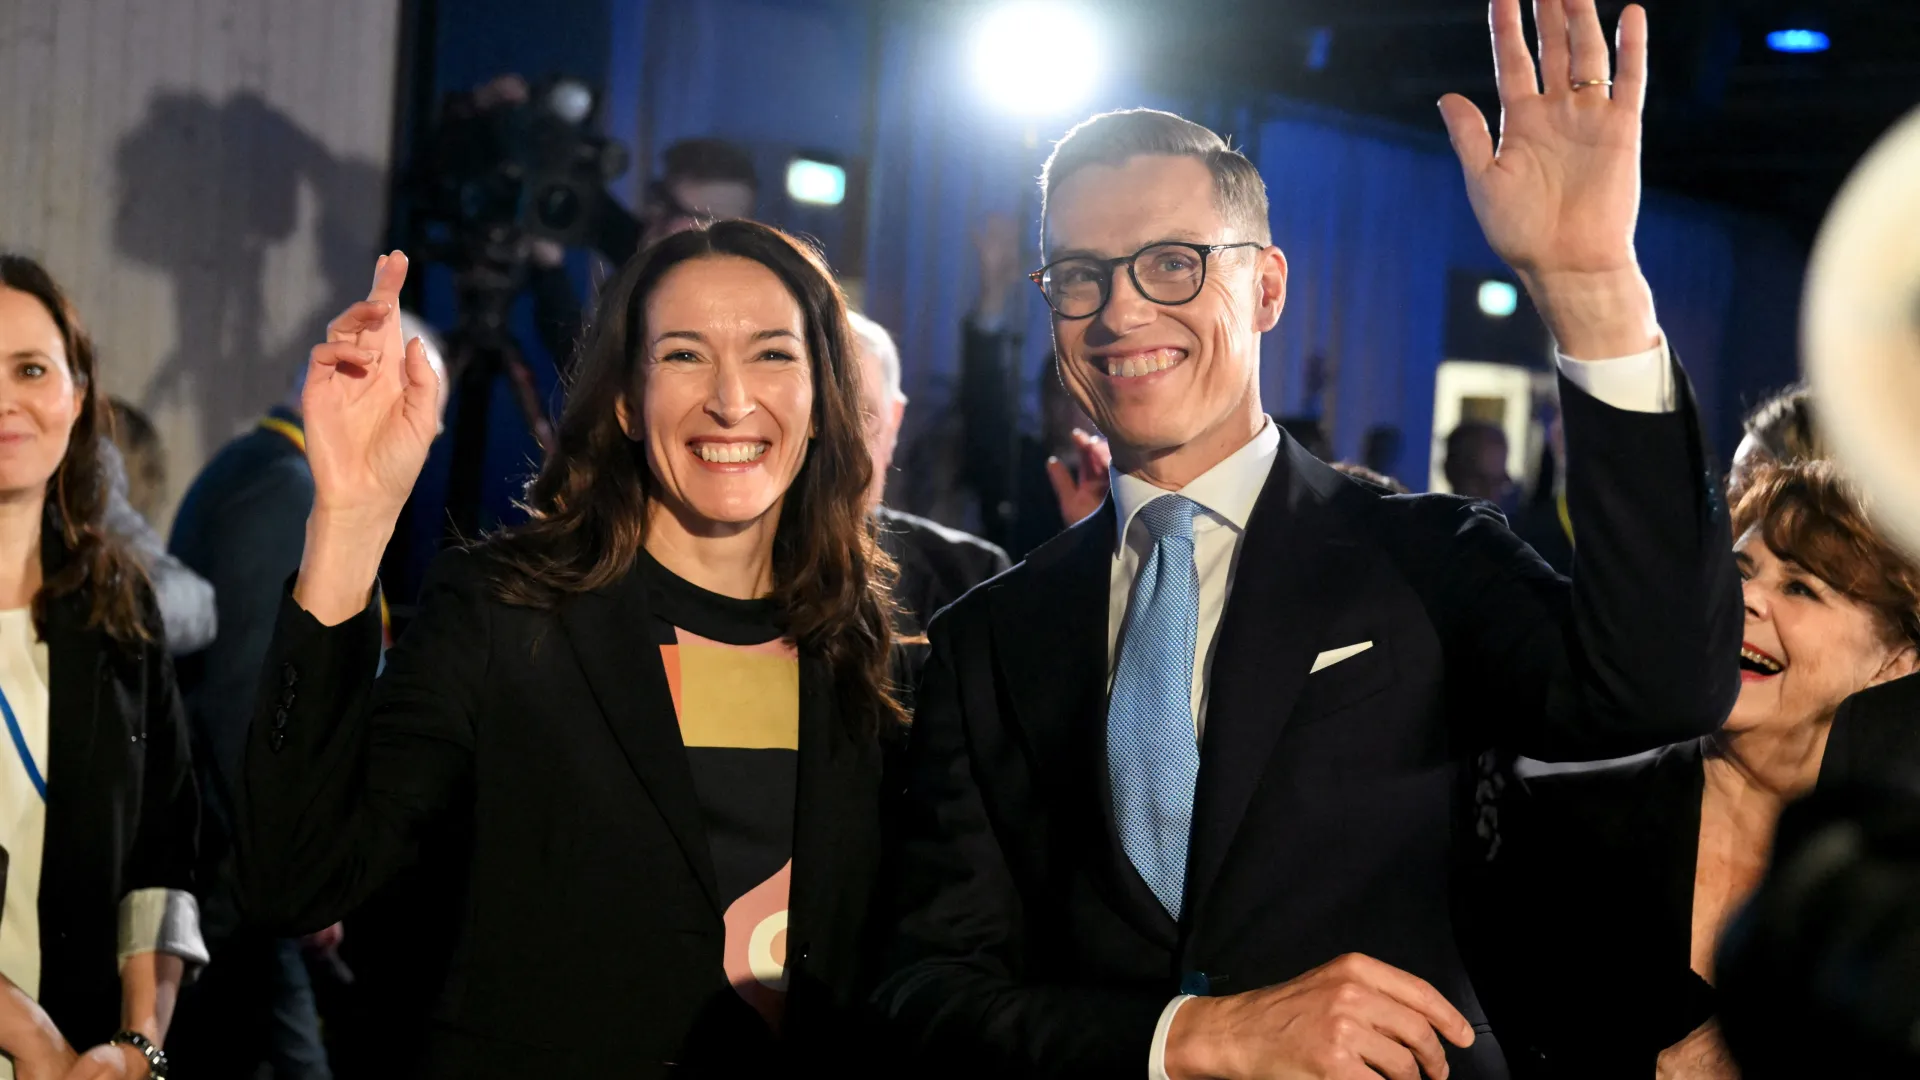 Stubb Narrowly Wins 1st Round Of Finland’s Presidential Poll